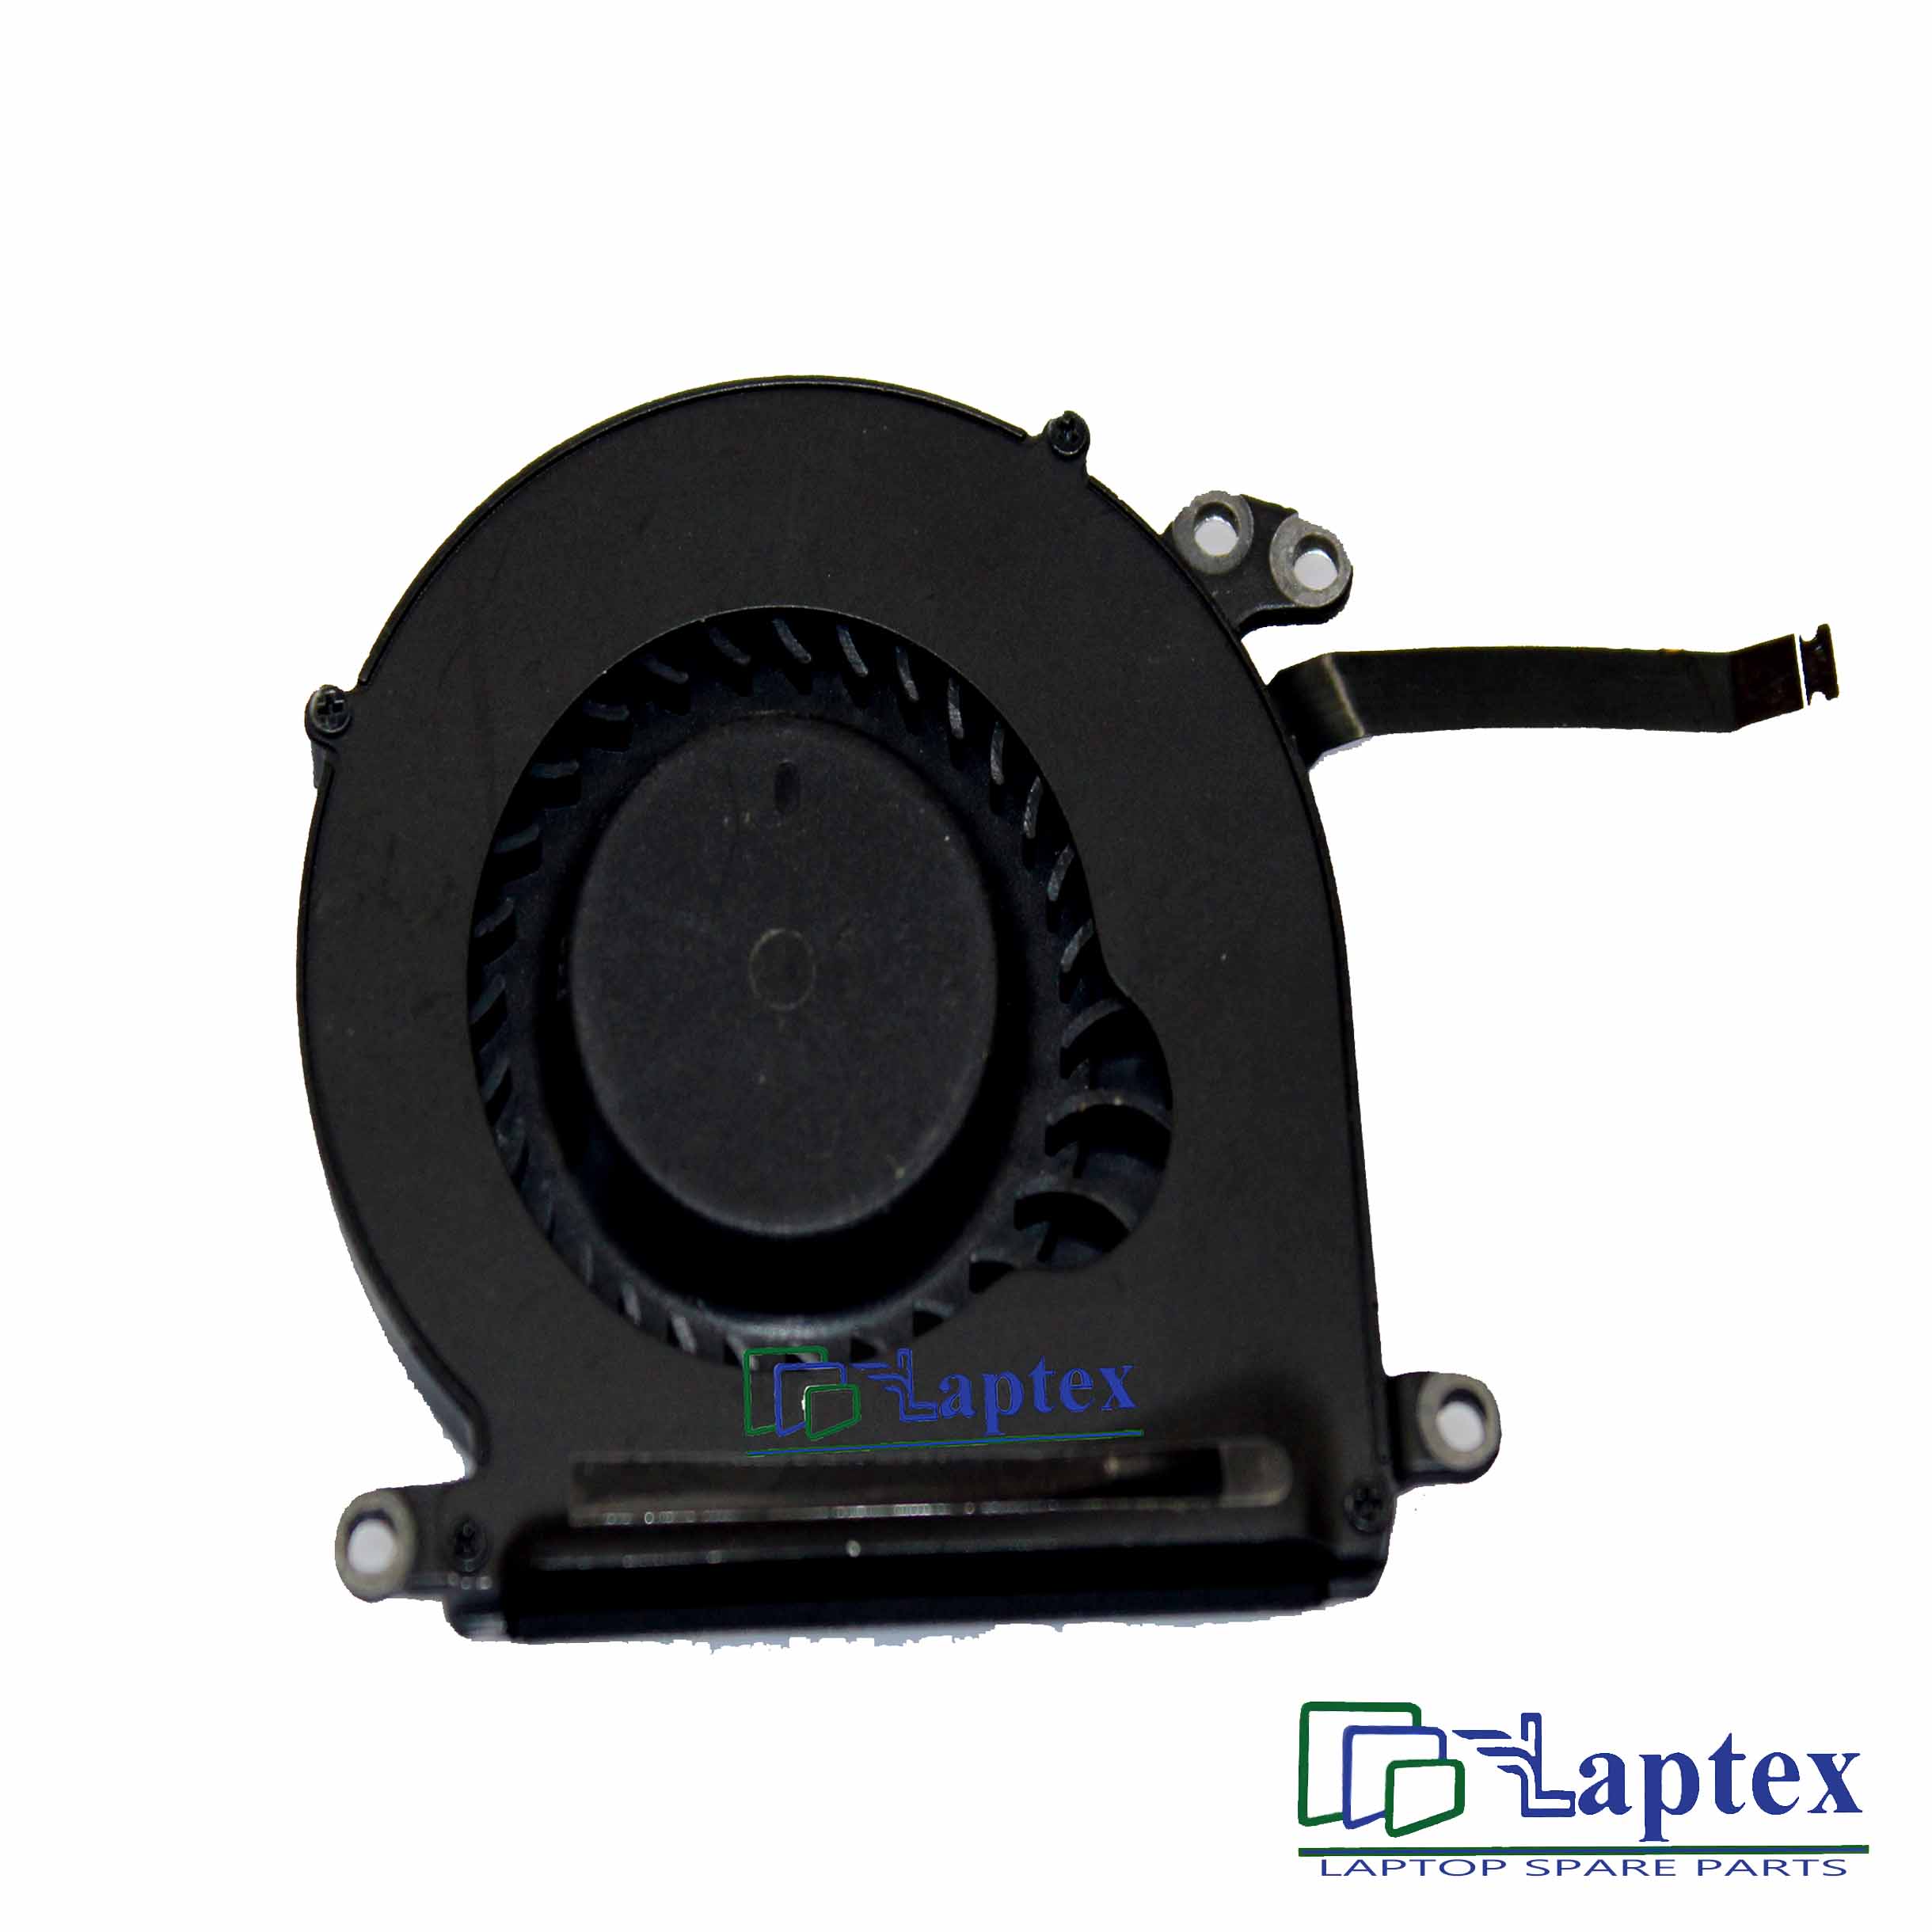 Air A1370 Cooling Fan